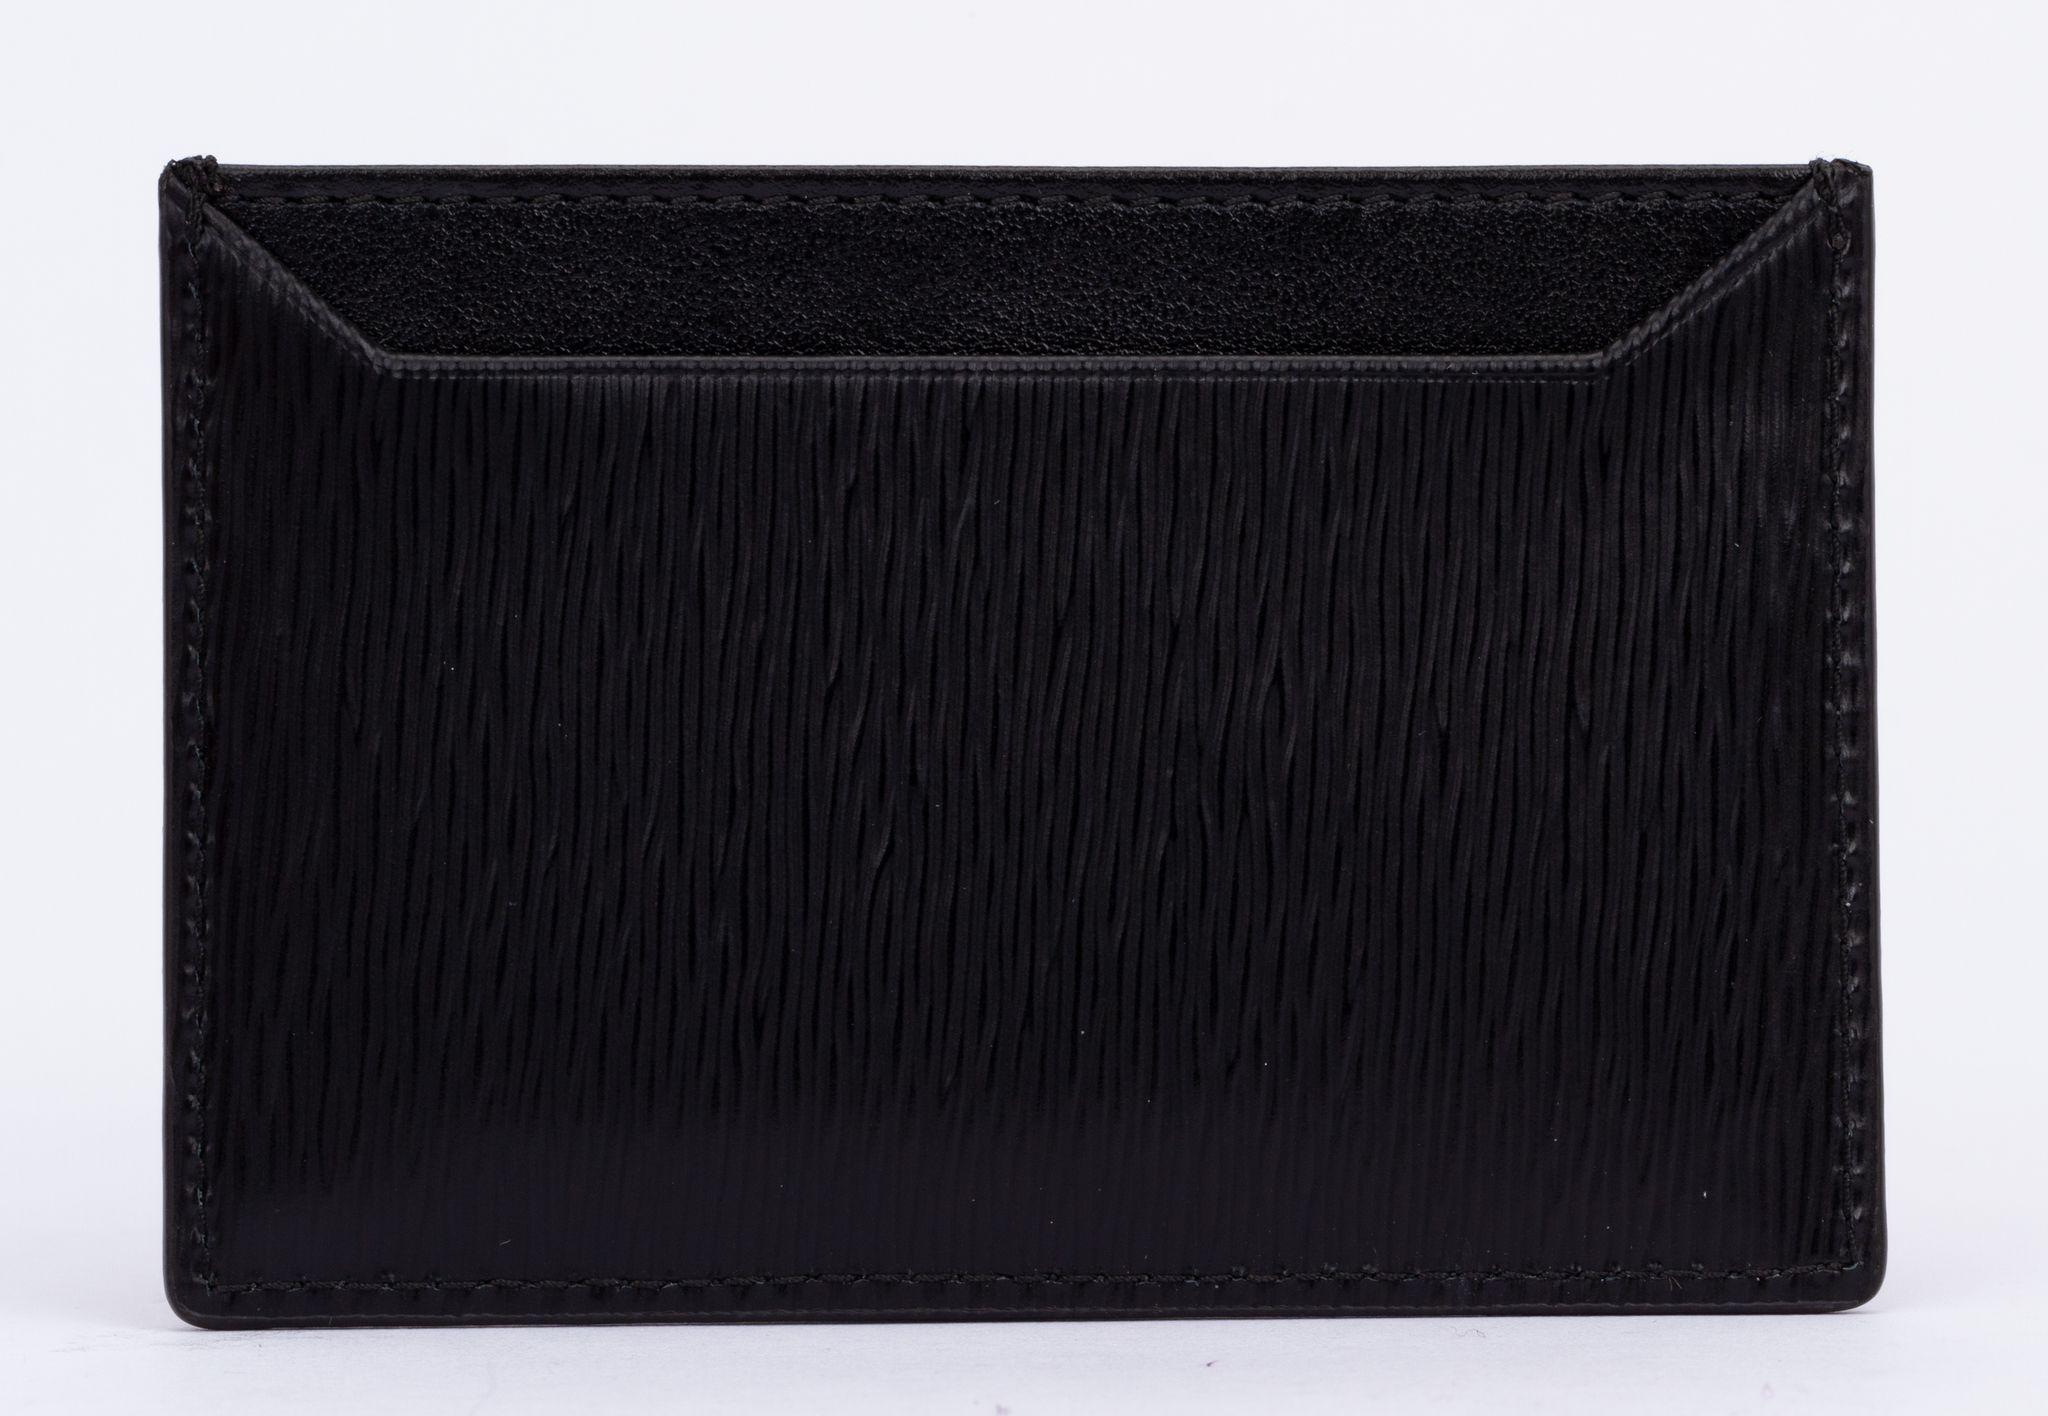 Prada Card Holder in Black. The Saffiano leather characterizes this sleek piece. The accessory with two card slots is decorated with a tonal enameled metal triangle logo. It come with the tag, booklets and original box.